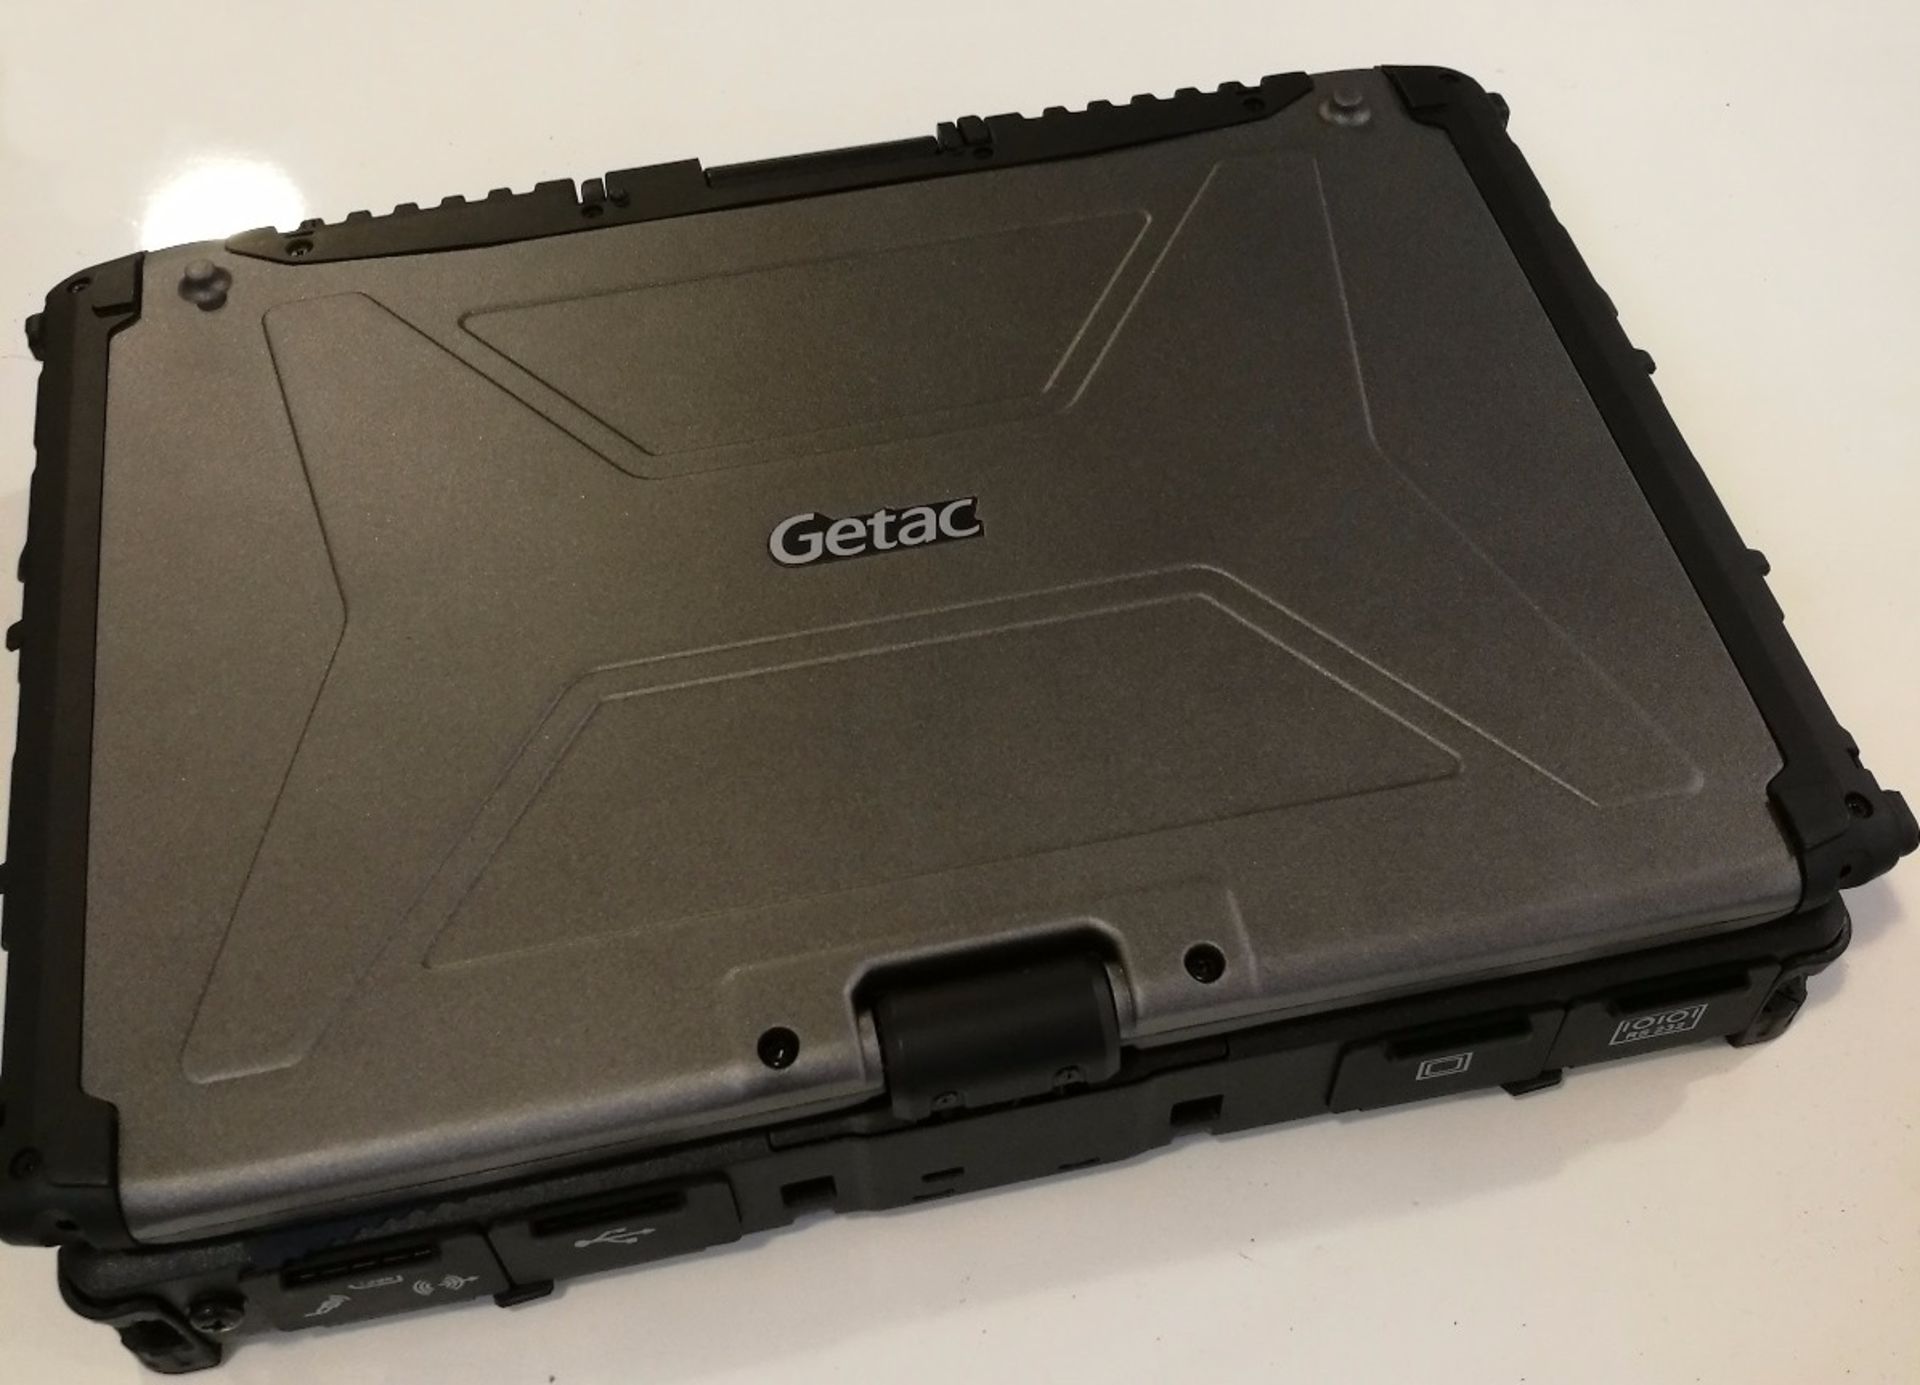 1 x Getac V200 Rugged Laptop Computer - Rugged Laptop That Transforms into a Tablet PC - Features an - Image 11 of 15